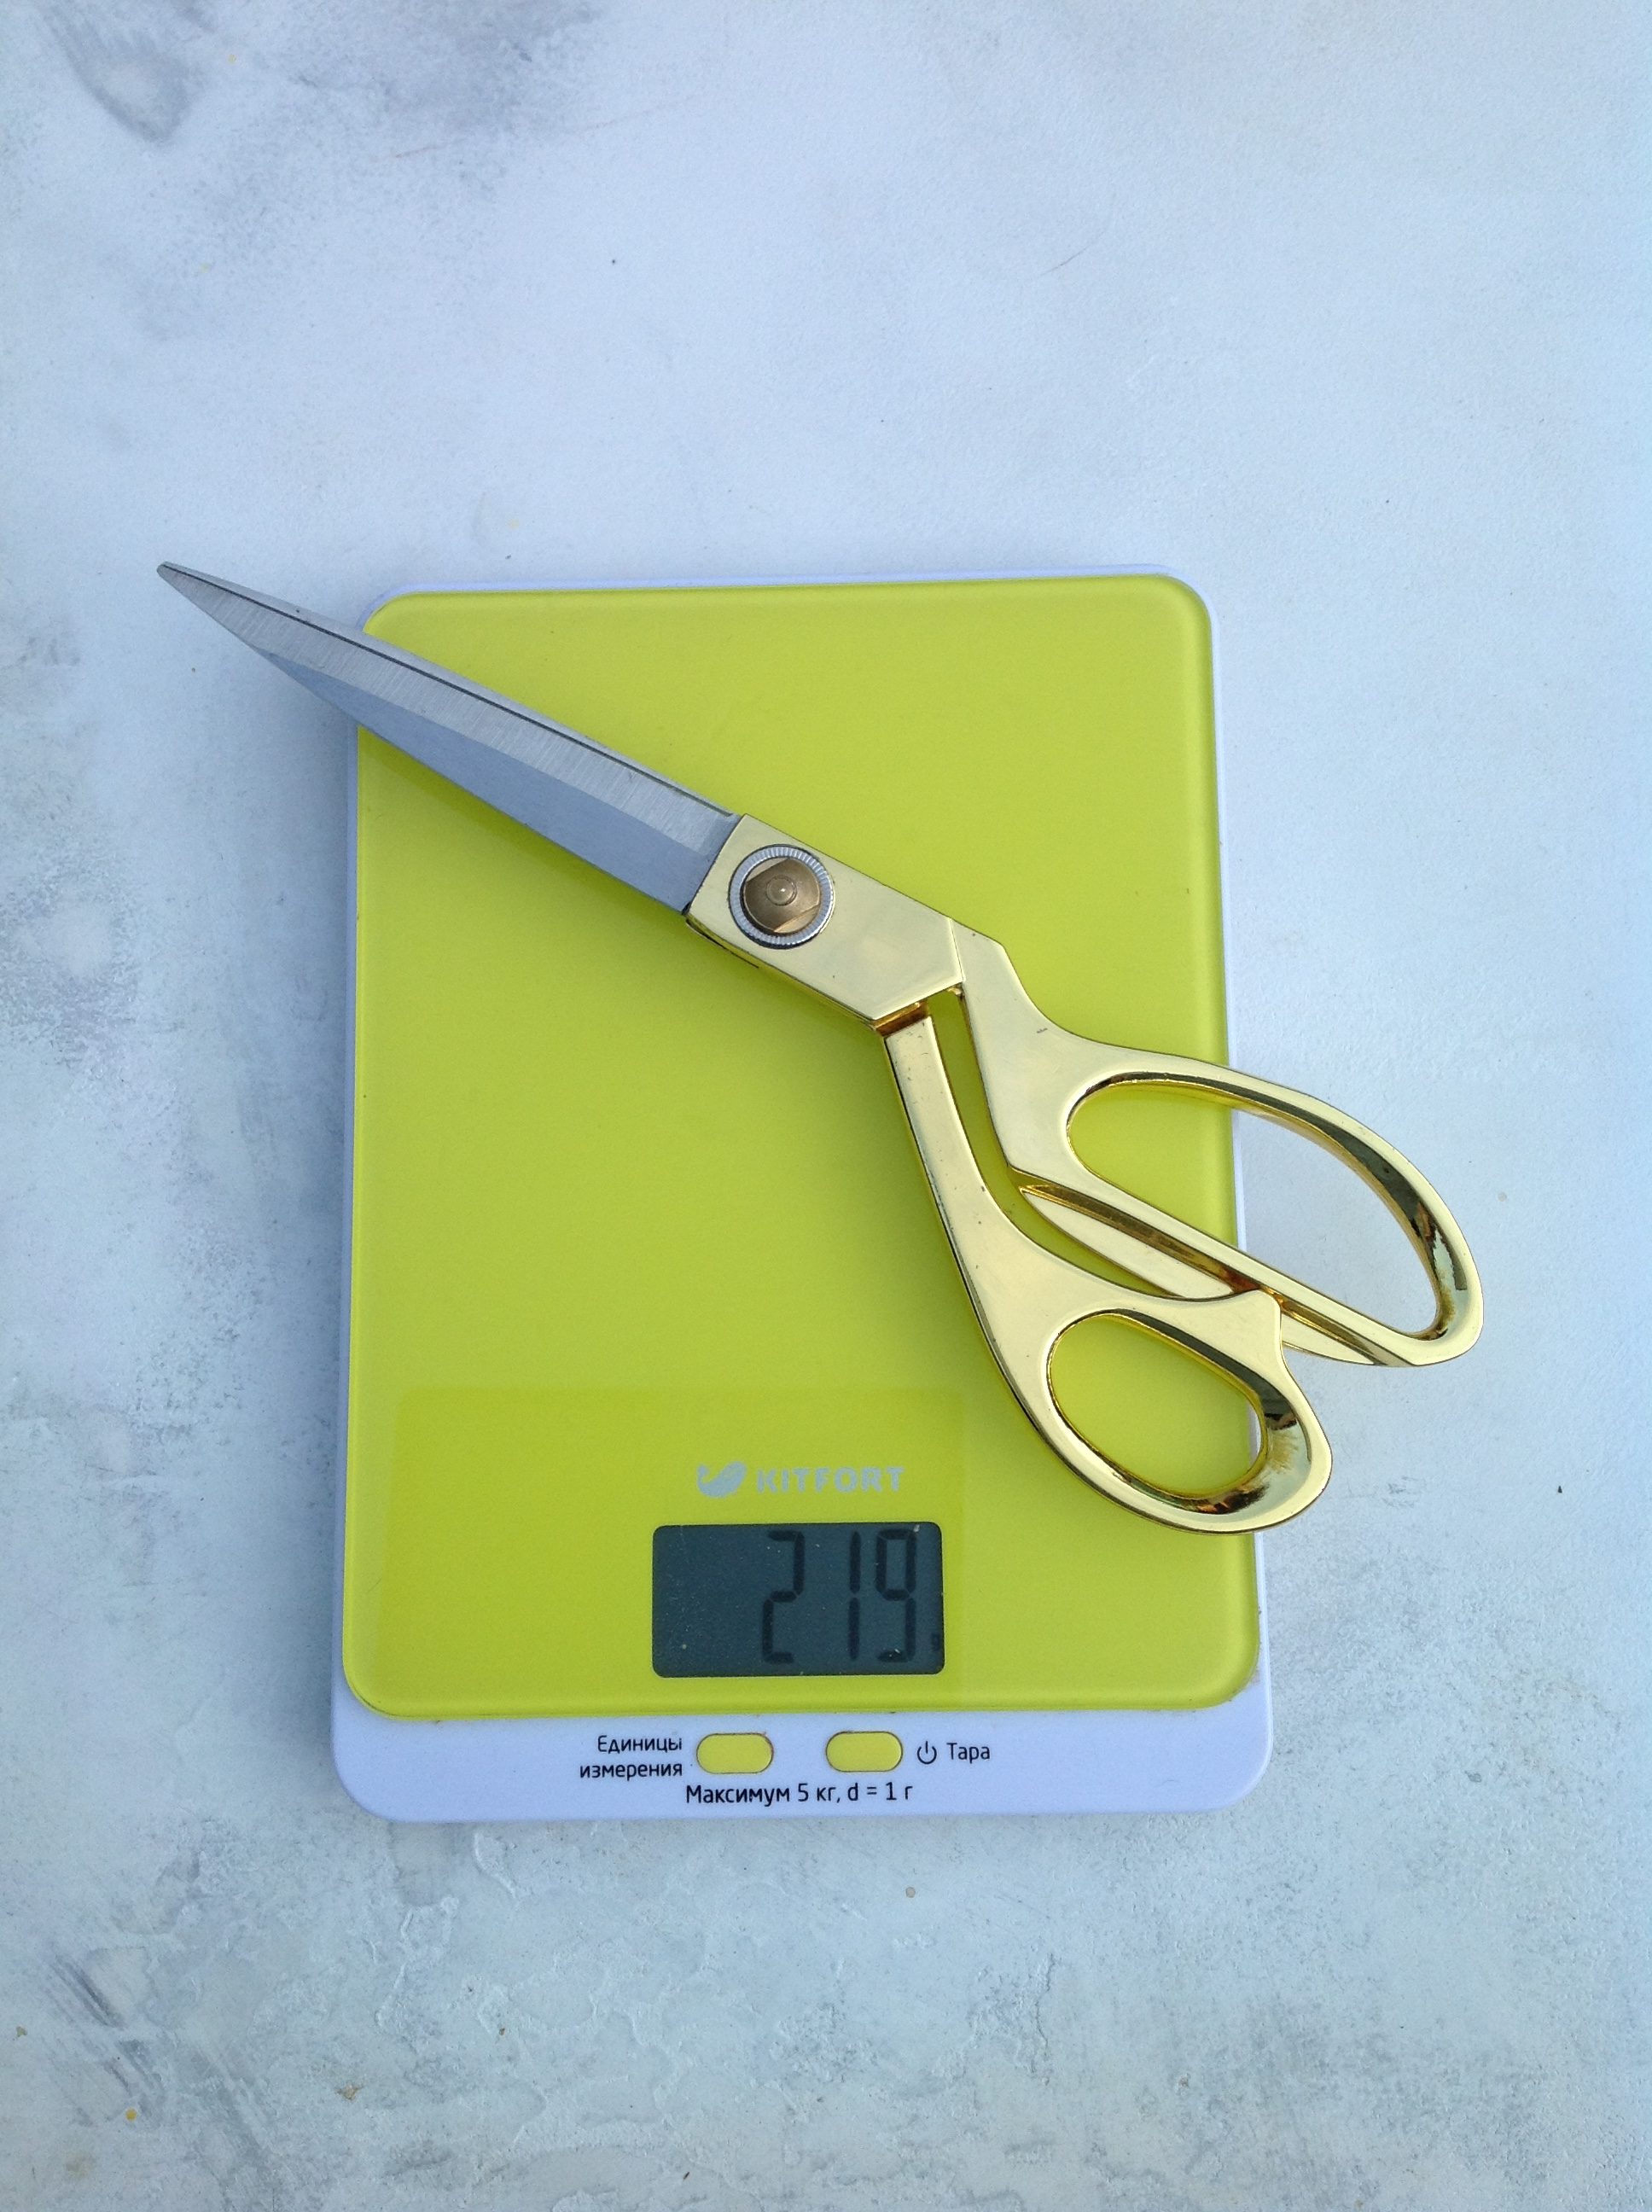 How much do sewing scissors weigh?